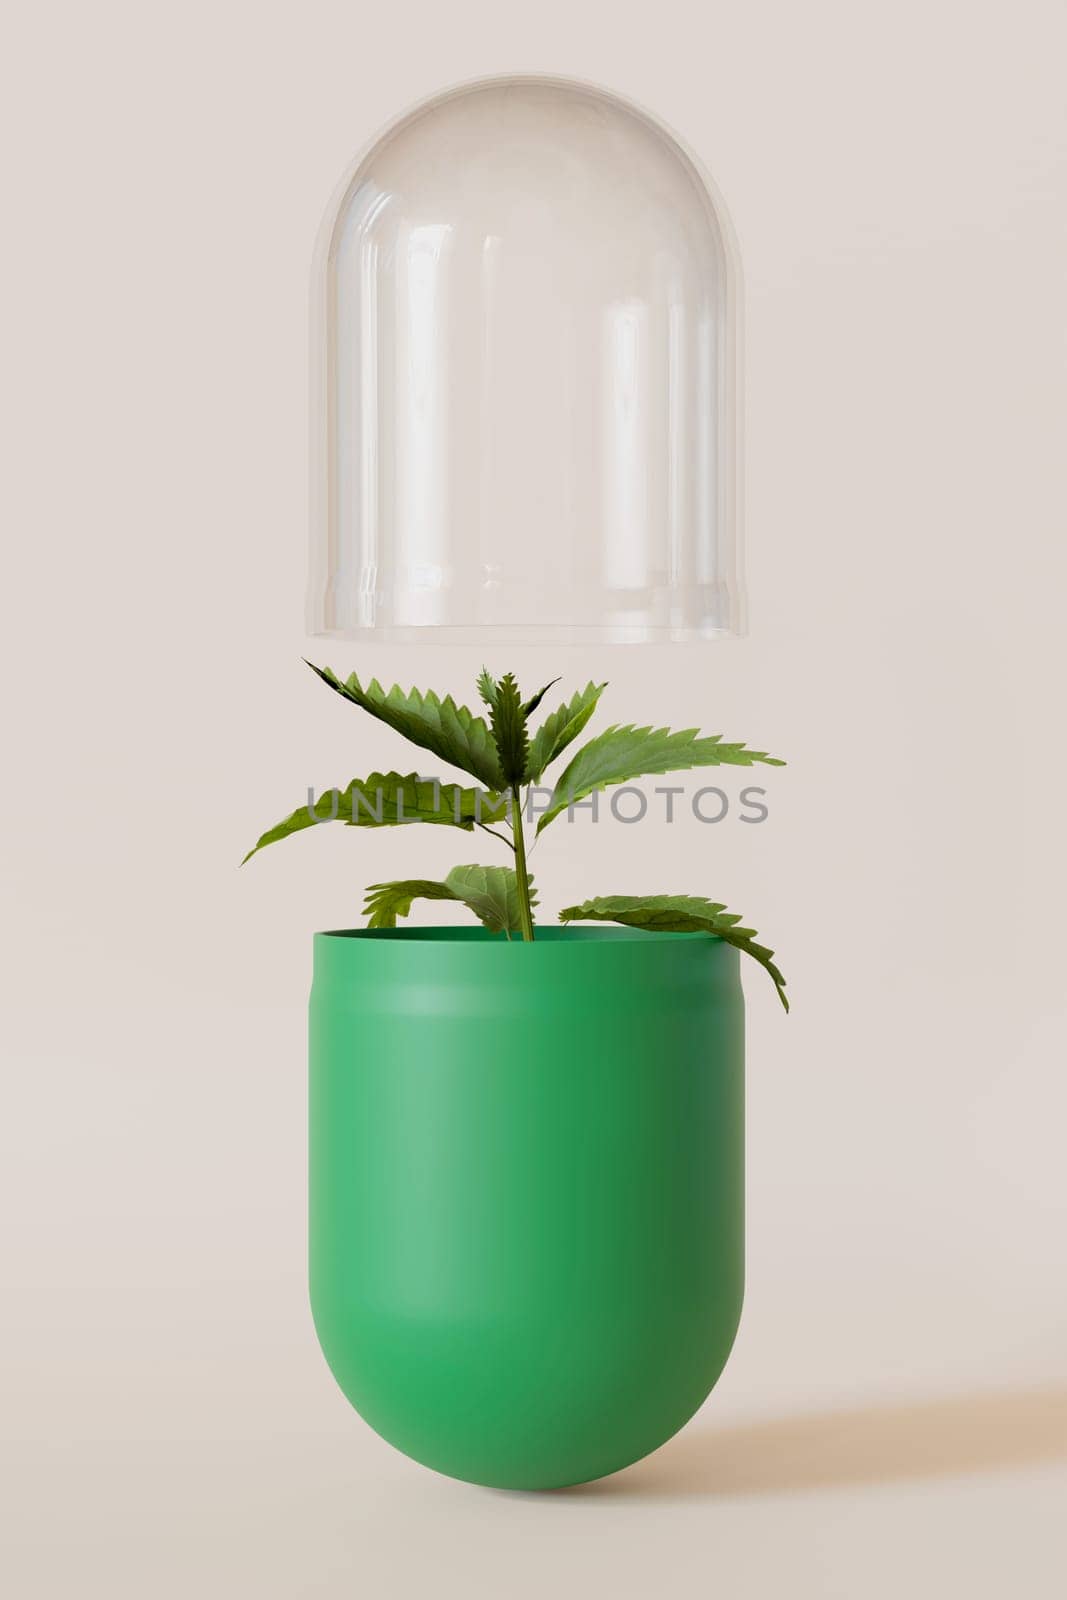 Green pill, capsule with a plant inside, depicting the essence of homeopathy and natural medicine. 3D rendering